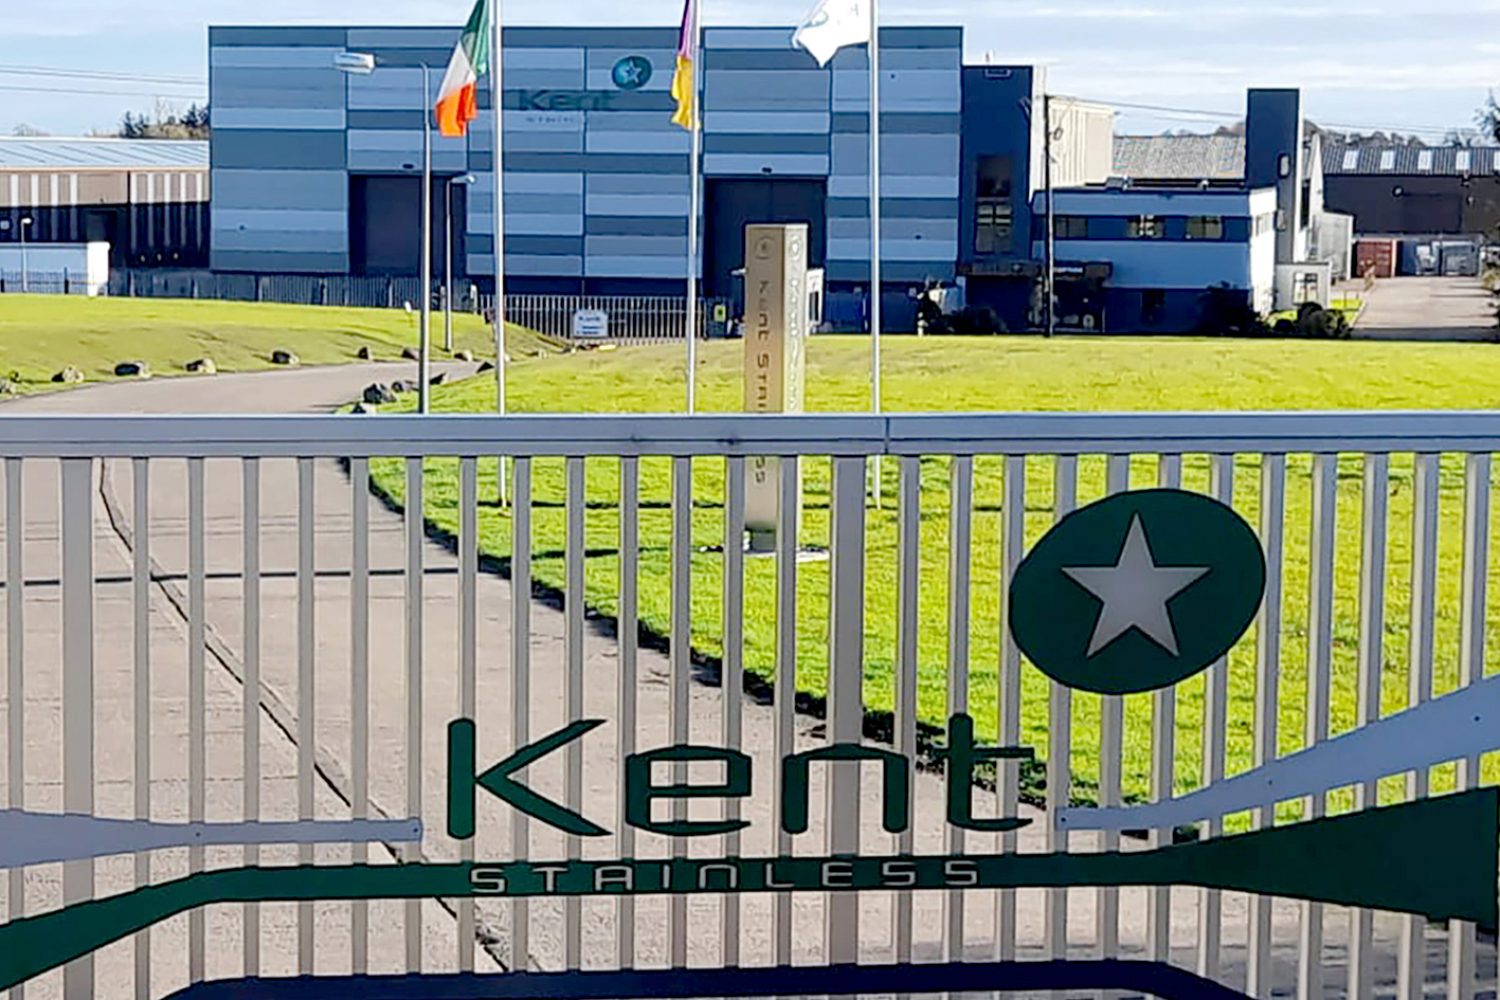 Kents Stainless, Ardcavan, WexfordPhotograph by Jim Campbell Photography (Wexford)
Phone: 00353 (0)87 343 4932
Web: https://warlens.co.uk/
email : campbell.pressfoto@gmail.com